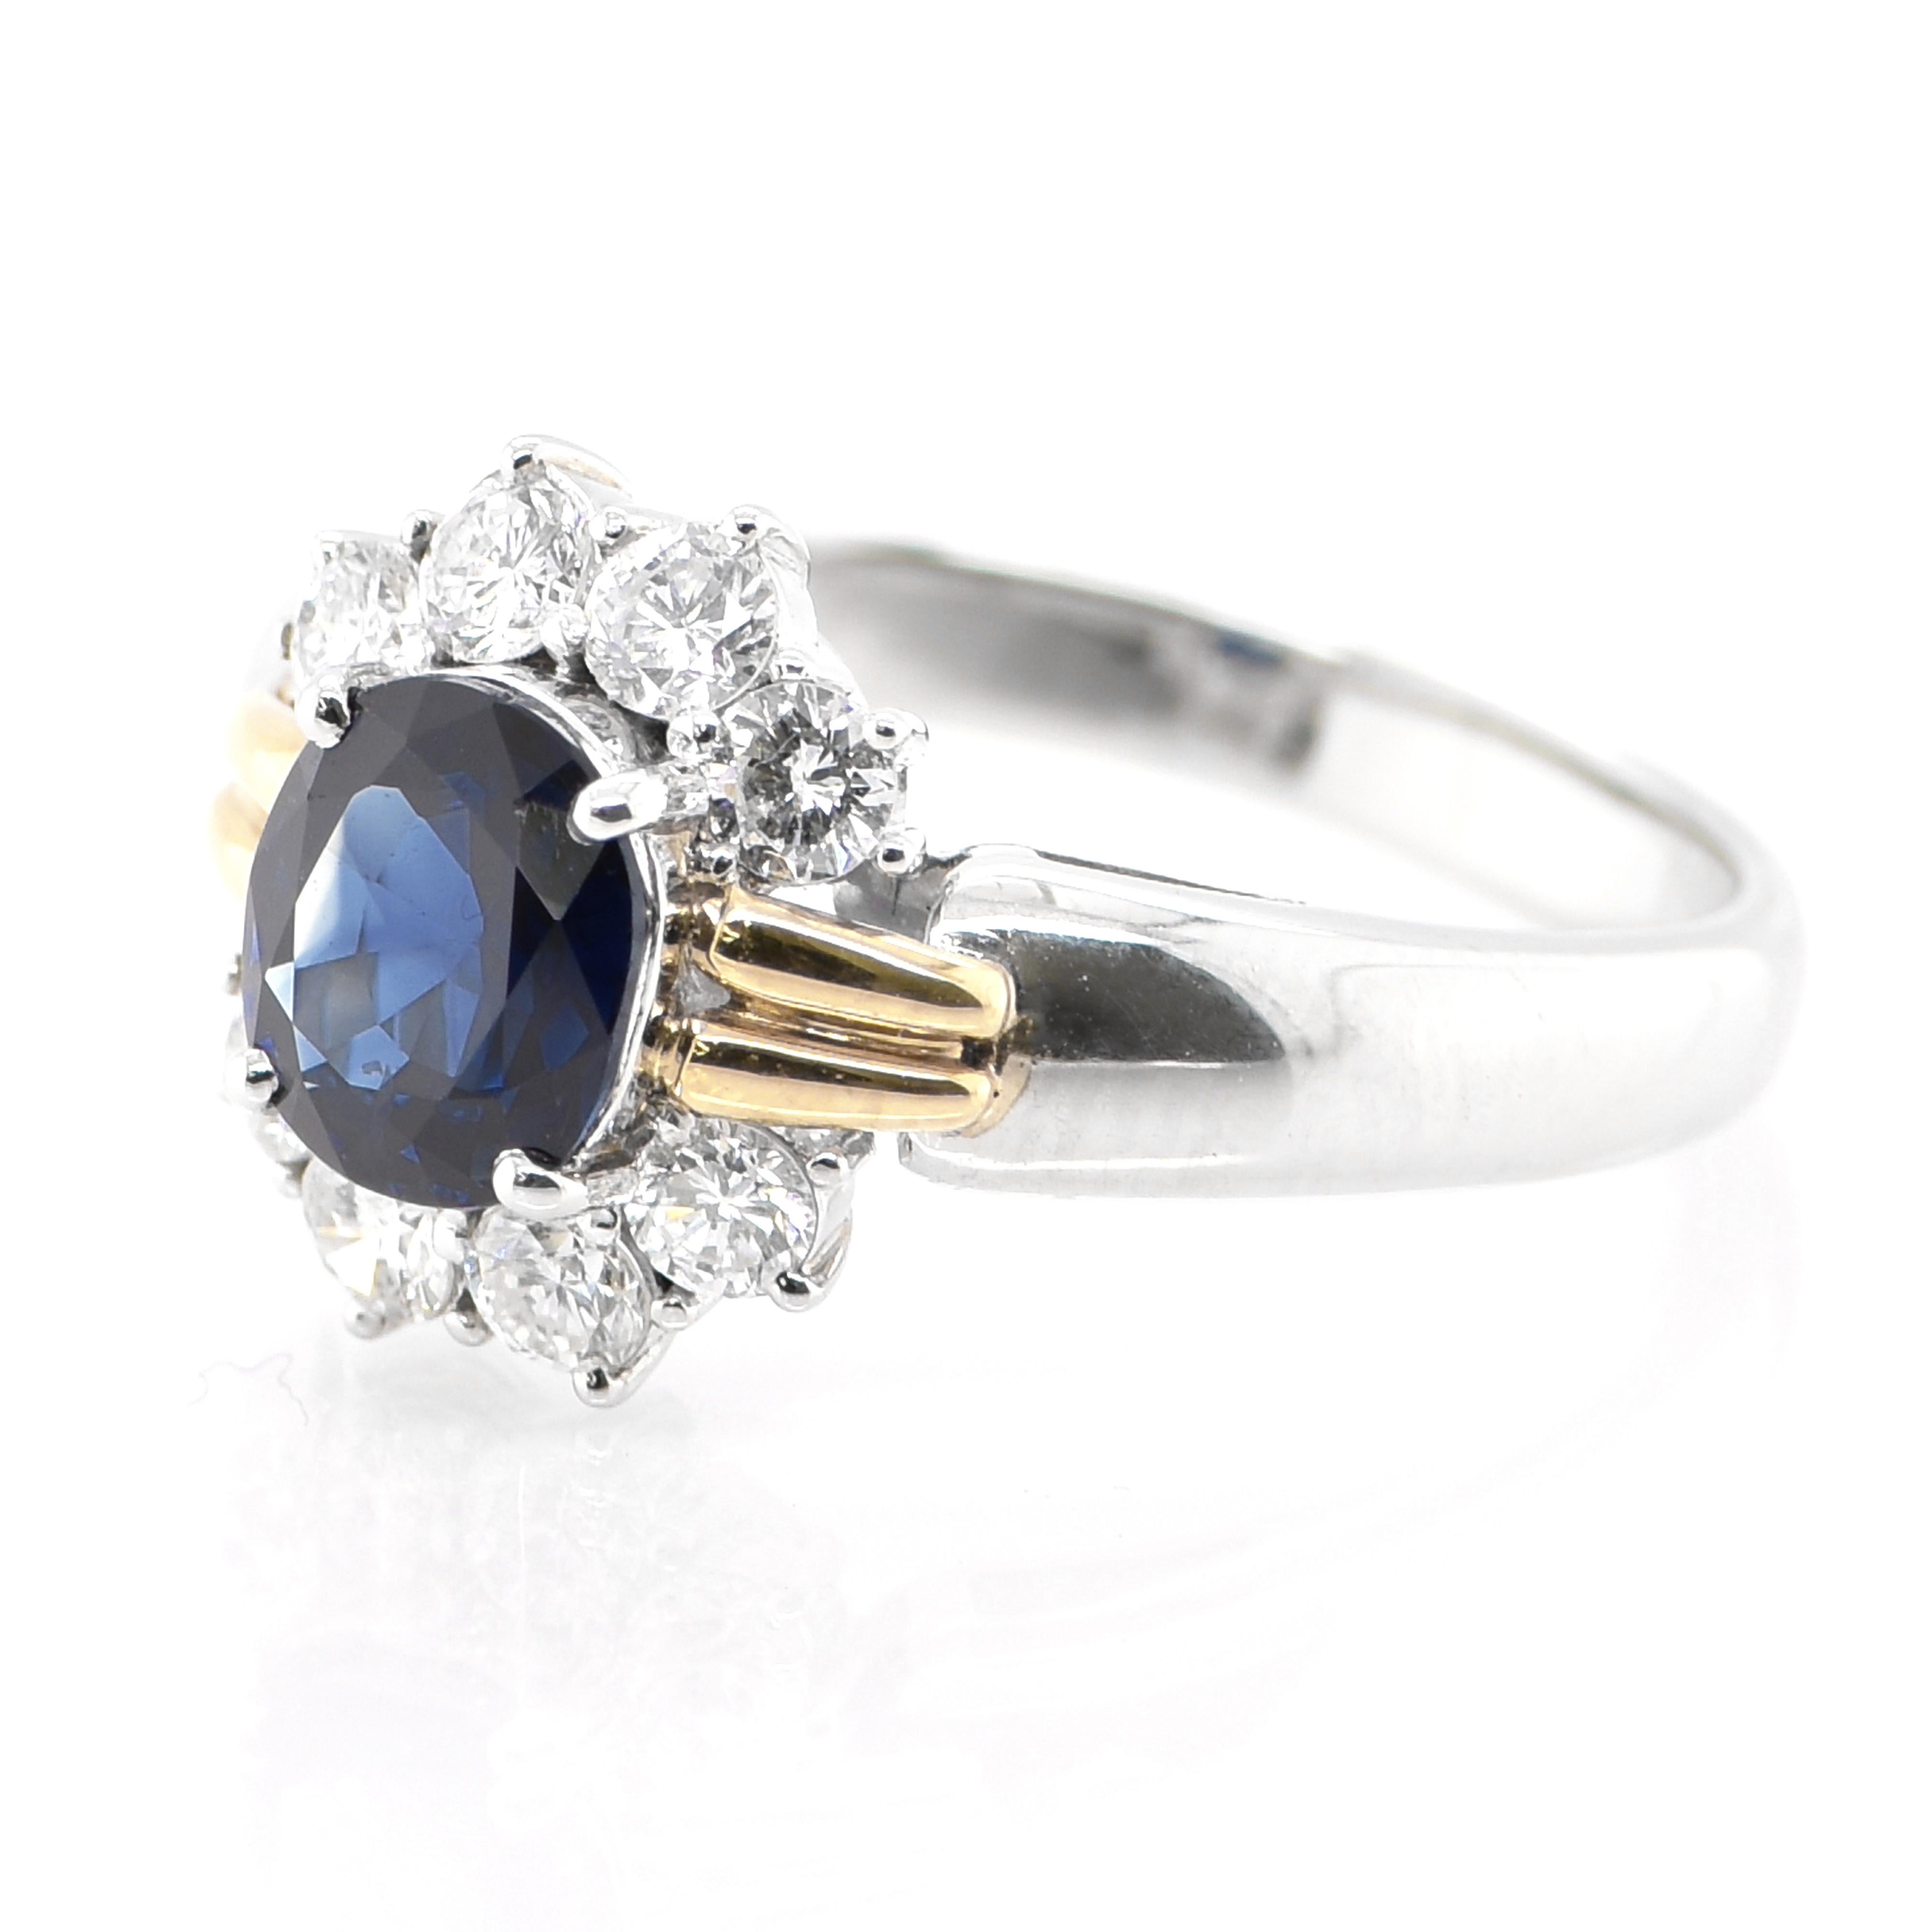 A stunning Ring featuring a 1.17 Carat Natural Sapphire and 0.44 Carats of Diamond Accents set in Platinum and 18K Yellow Gold. Sapphires have extraordinary durability - they excel in hardness as well as toughness and durability making them very